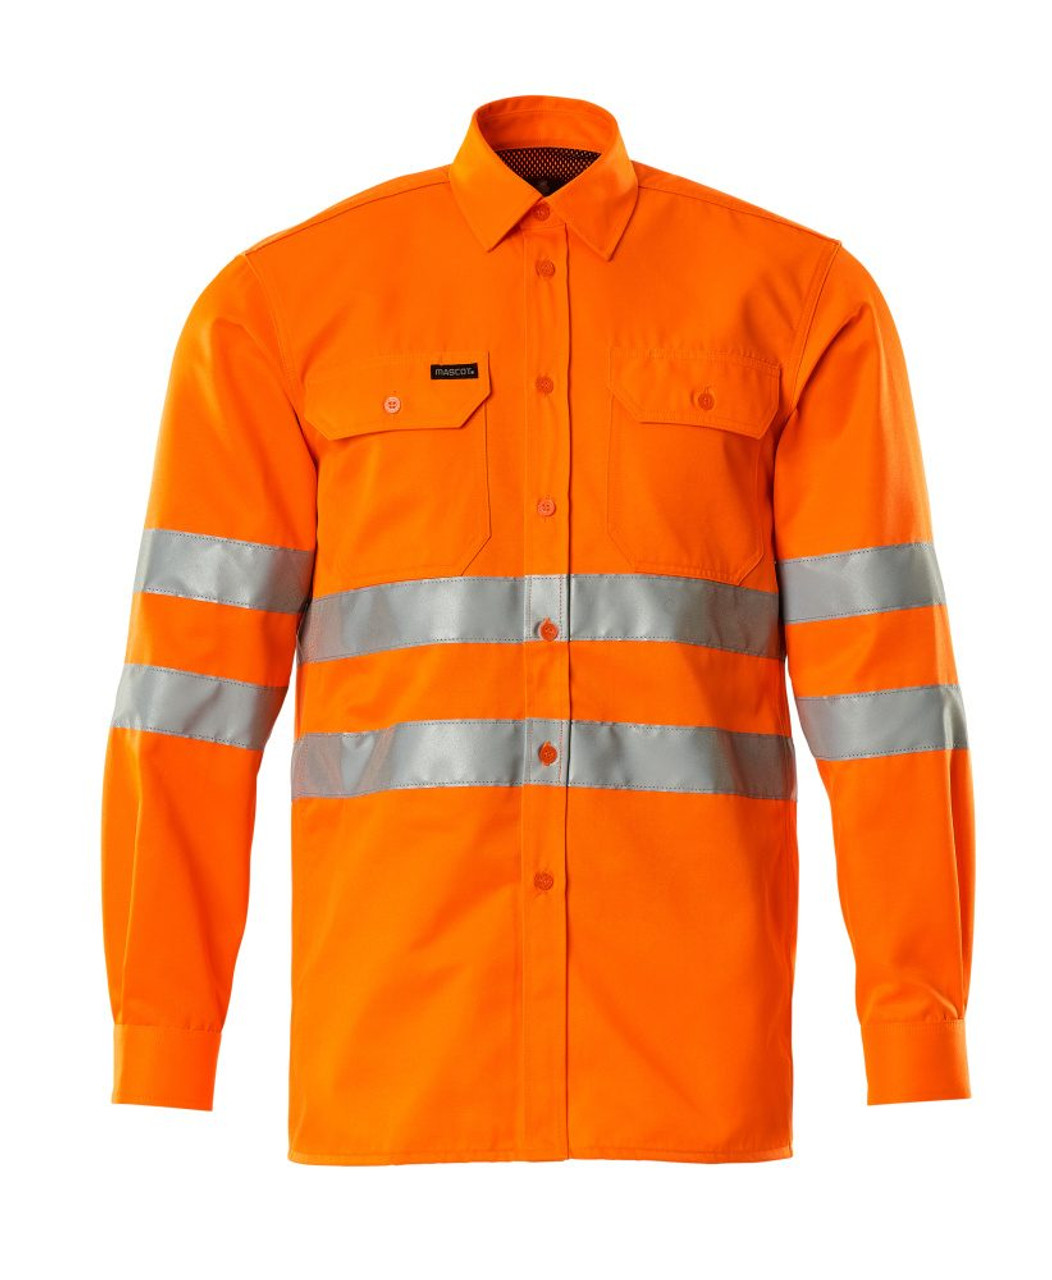 MASCOT Shirt | 06004 High Vis Orange Shirt with Reflective Tape in Durable Poly/Cotton Blend